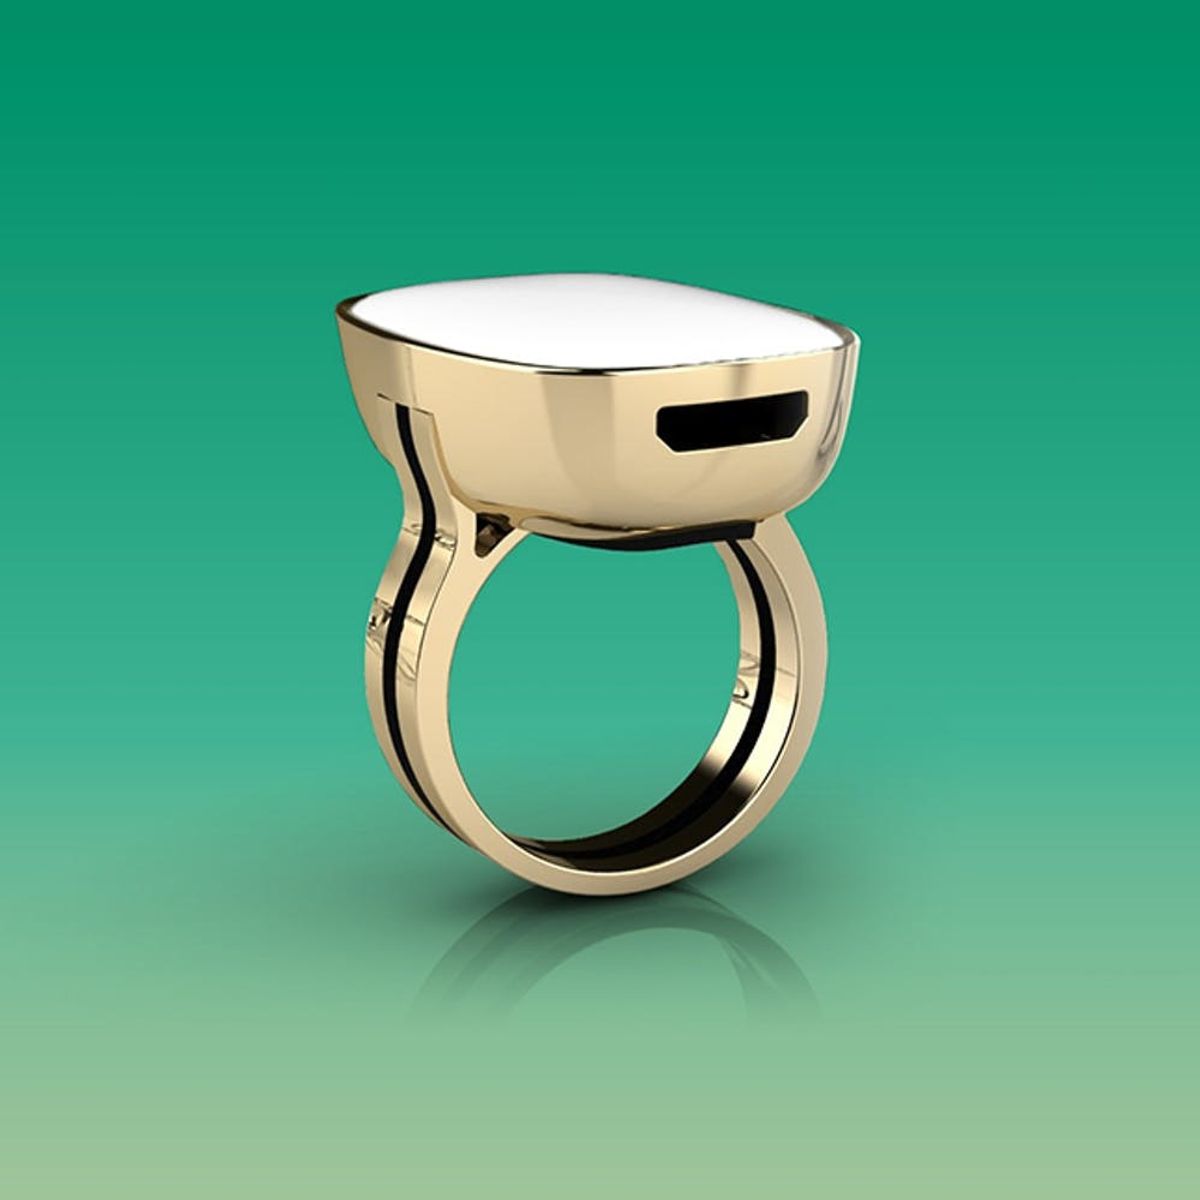 Mood Rings + Wearables Had a Baby and This Pretty Ring Is It